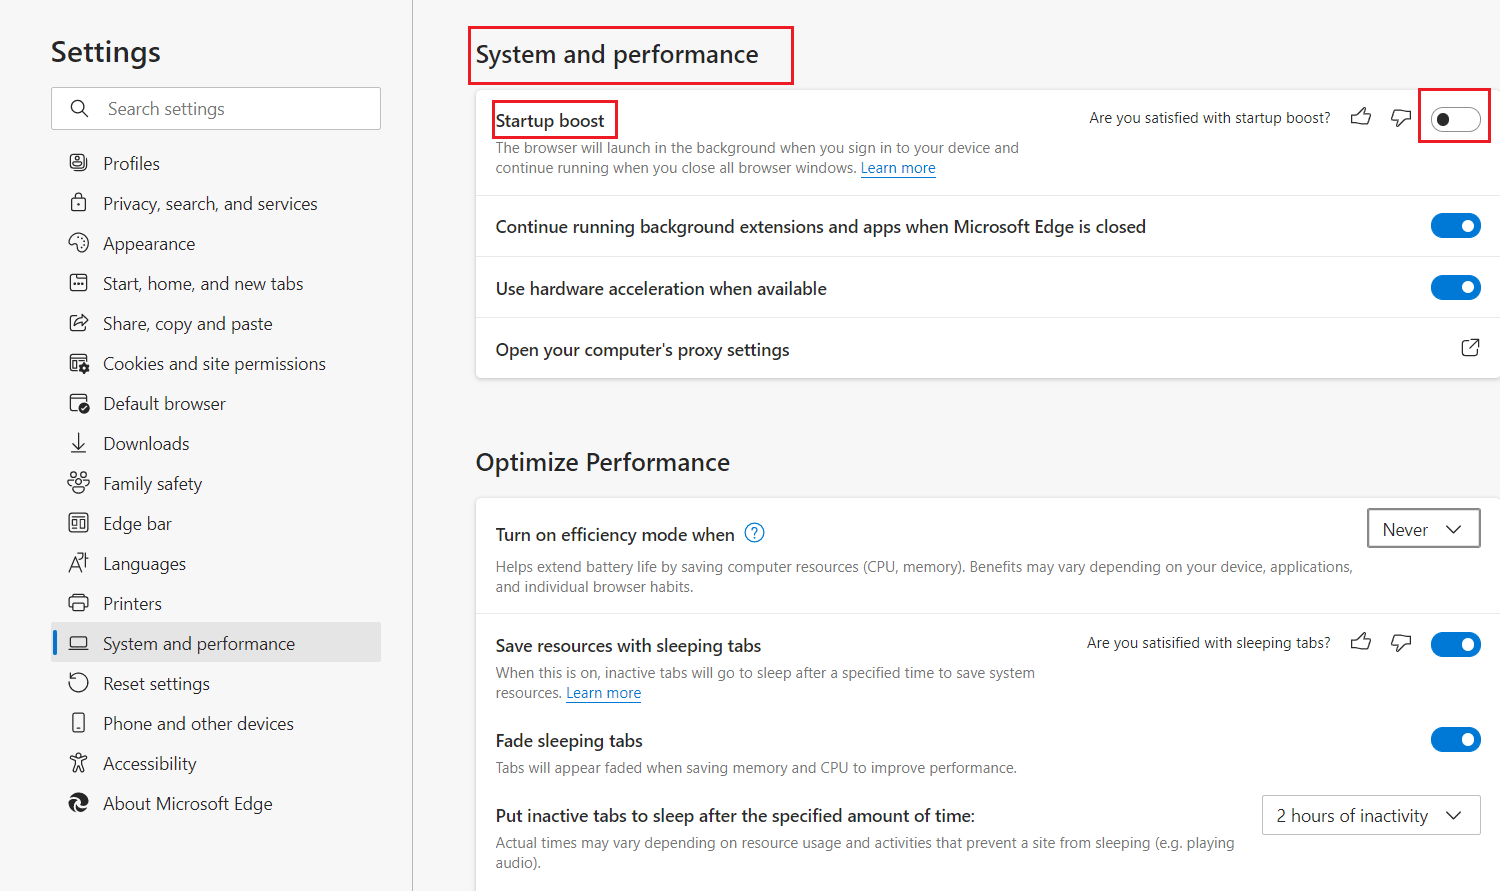 microsoft edge system and performance settings